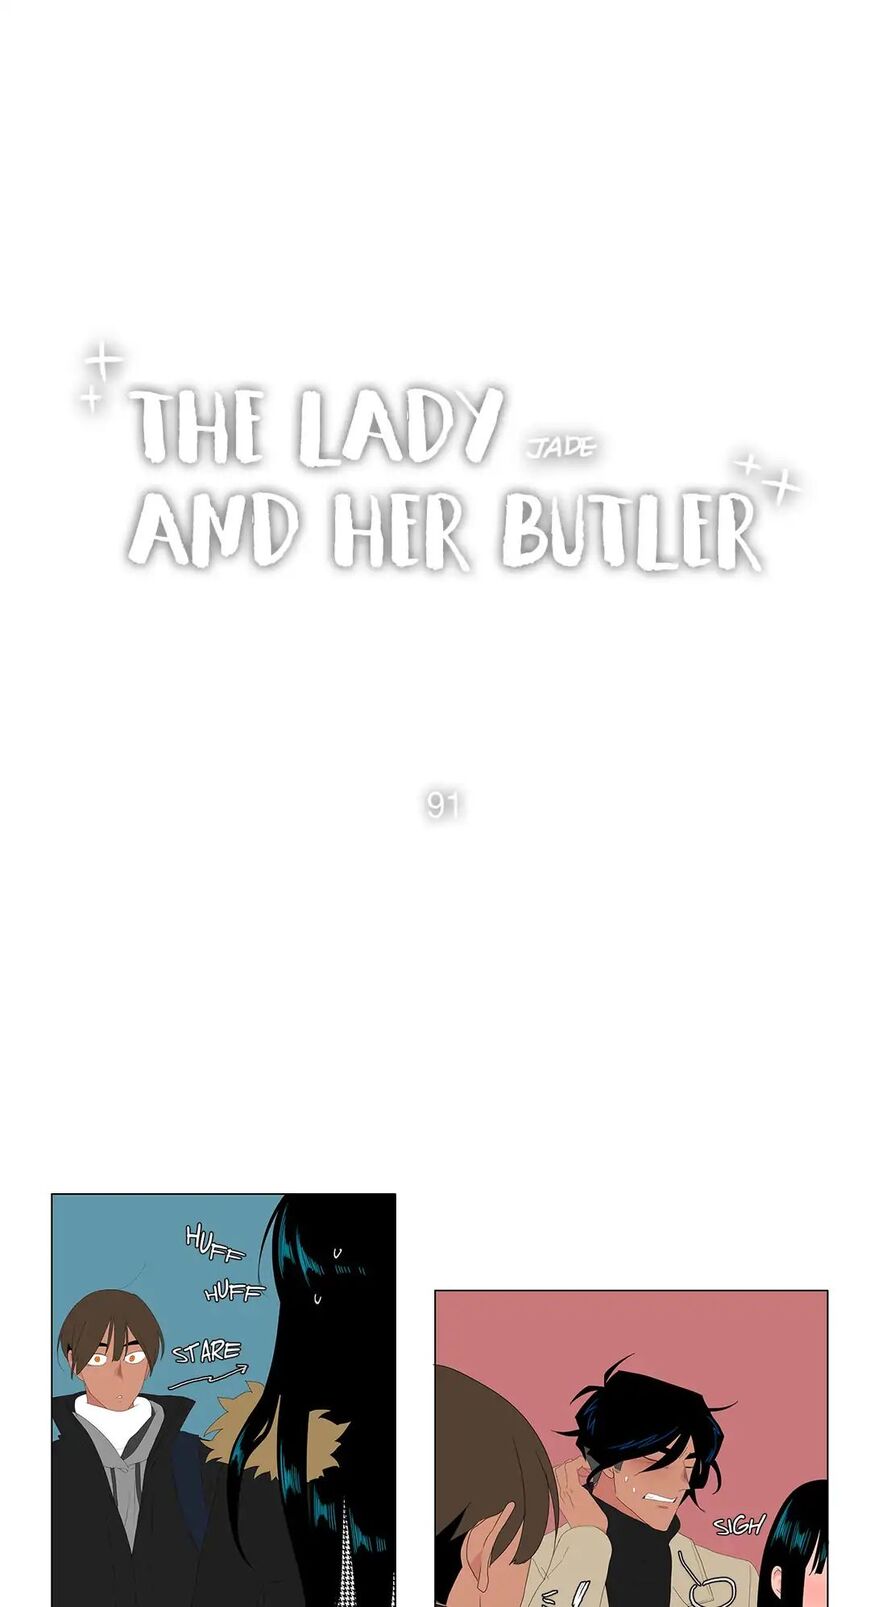 The Lady and Her Butler 91